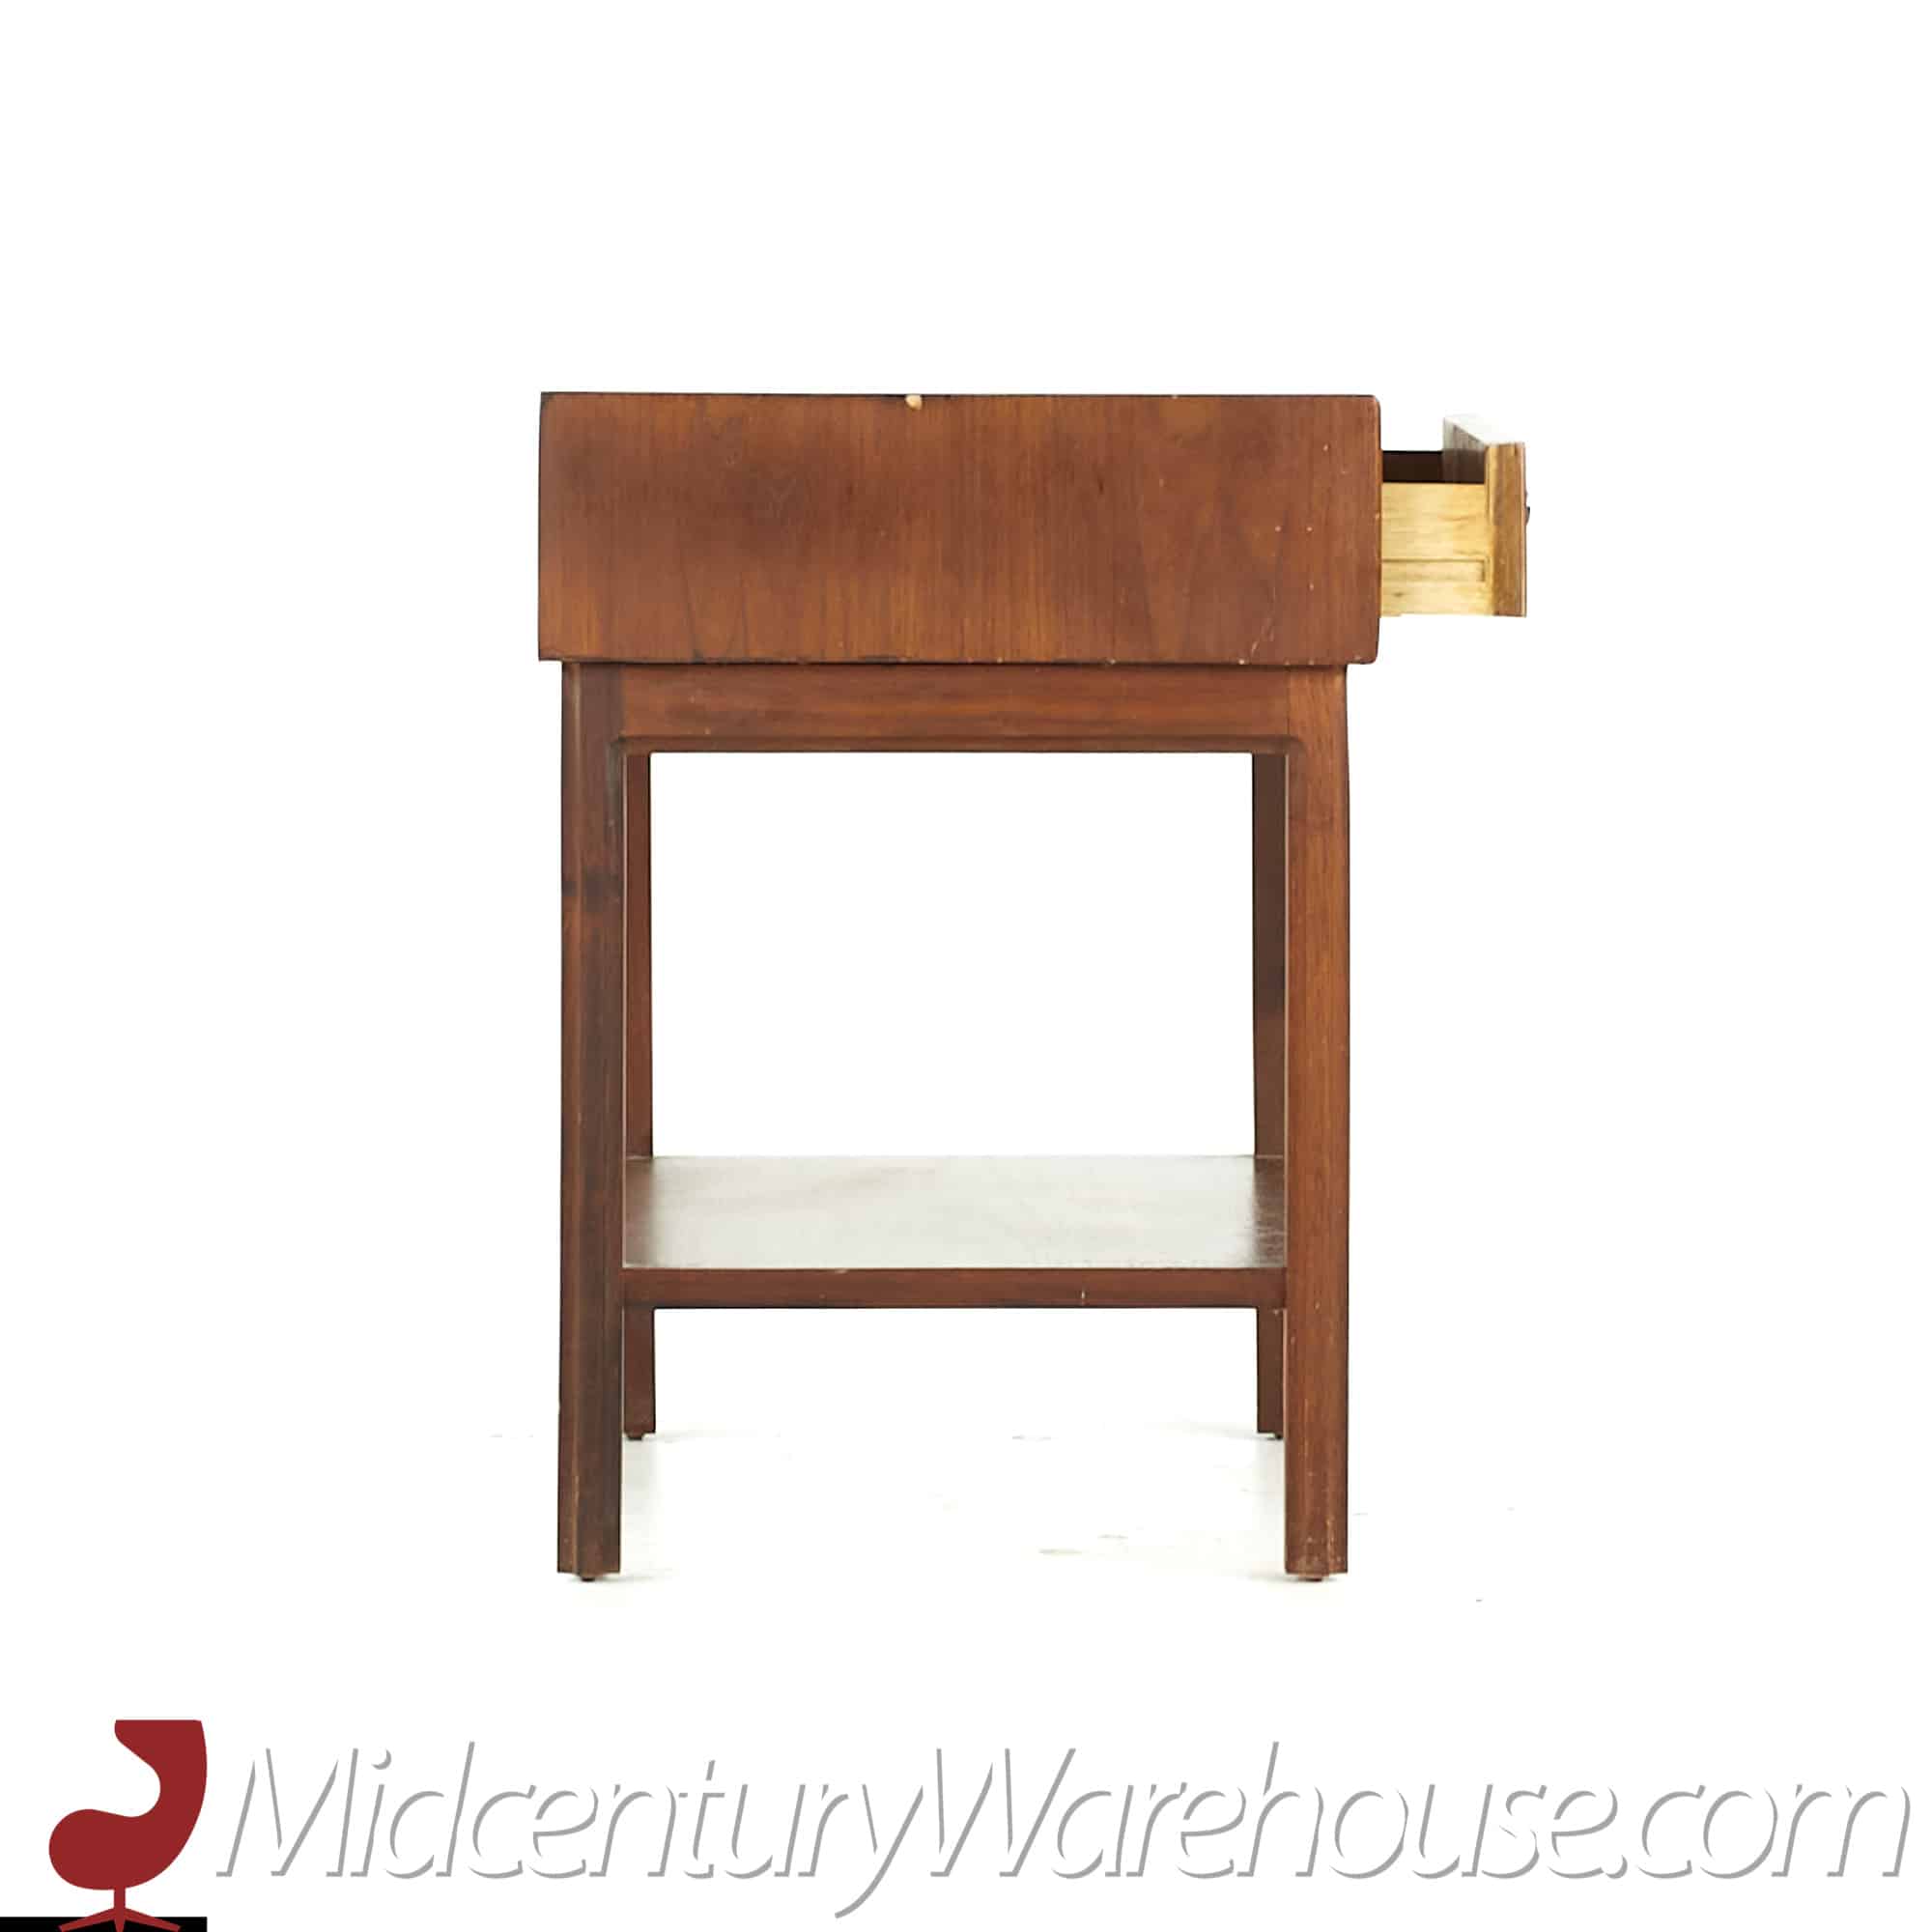 Jack Cartwright for Founders Mid Century Walnut Nightstand